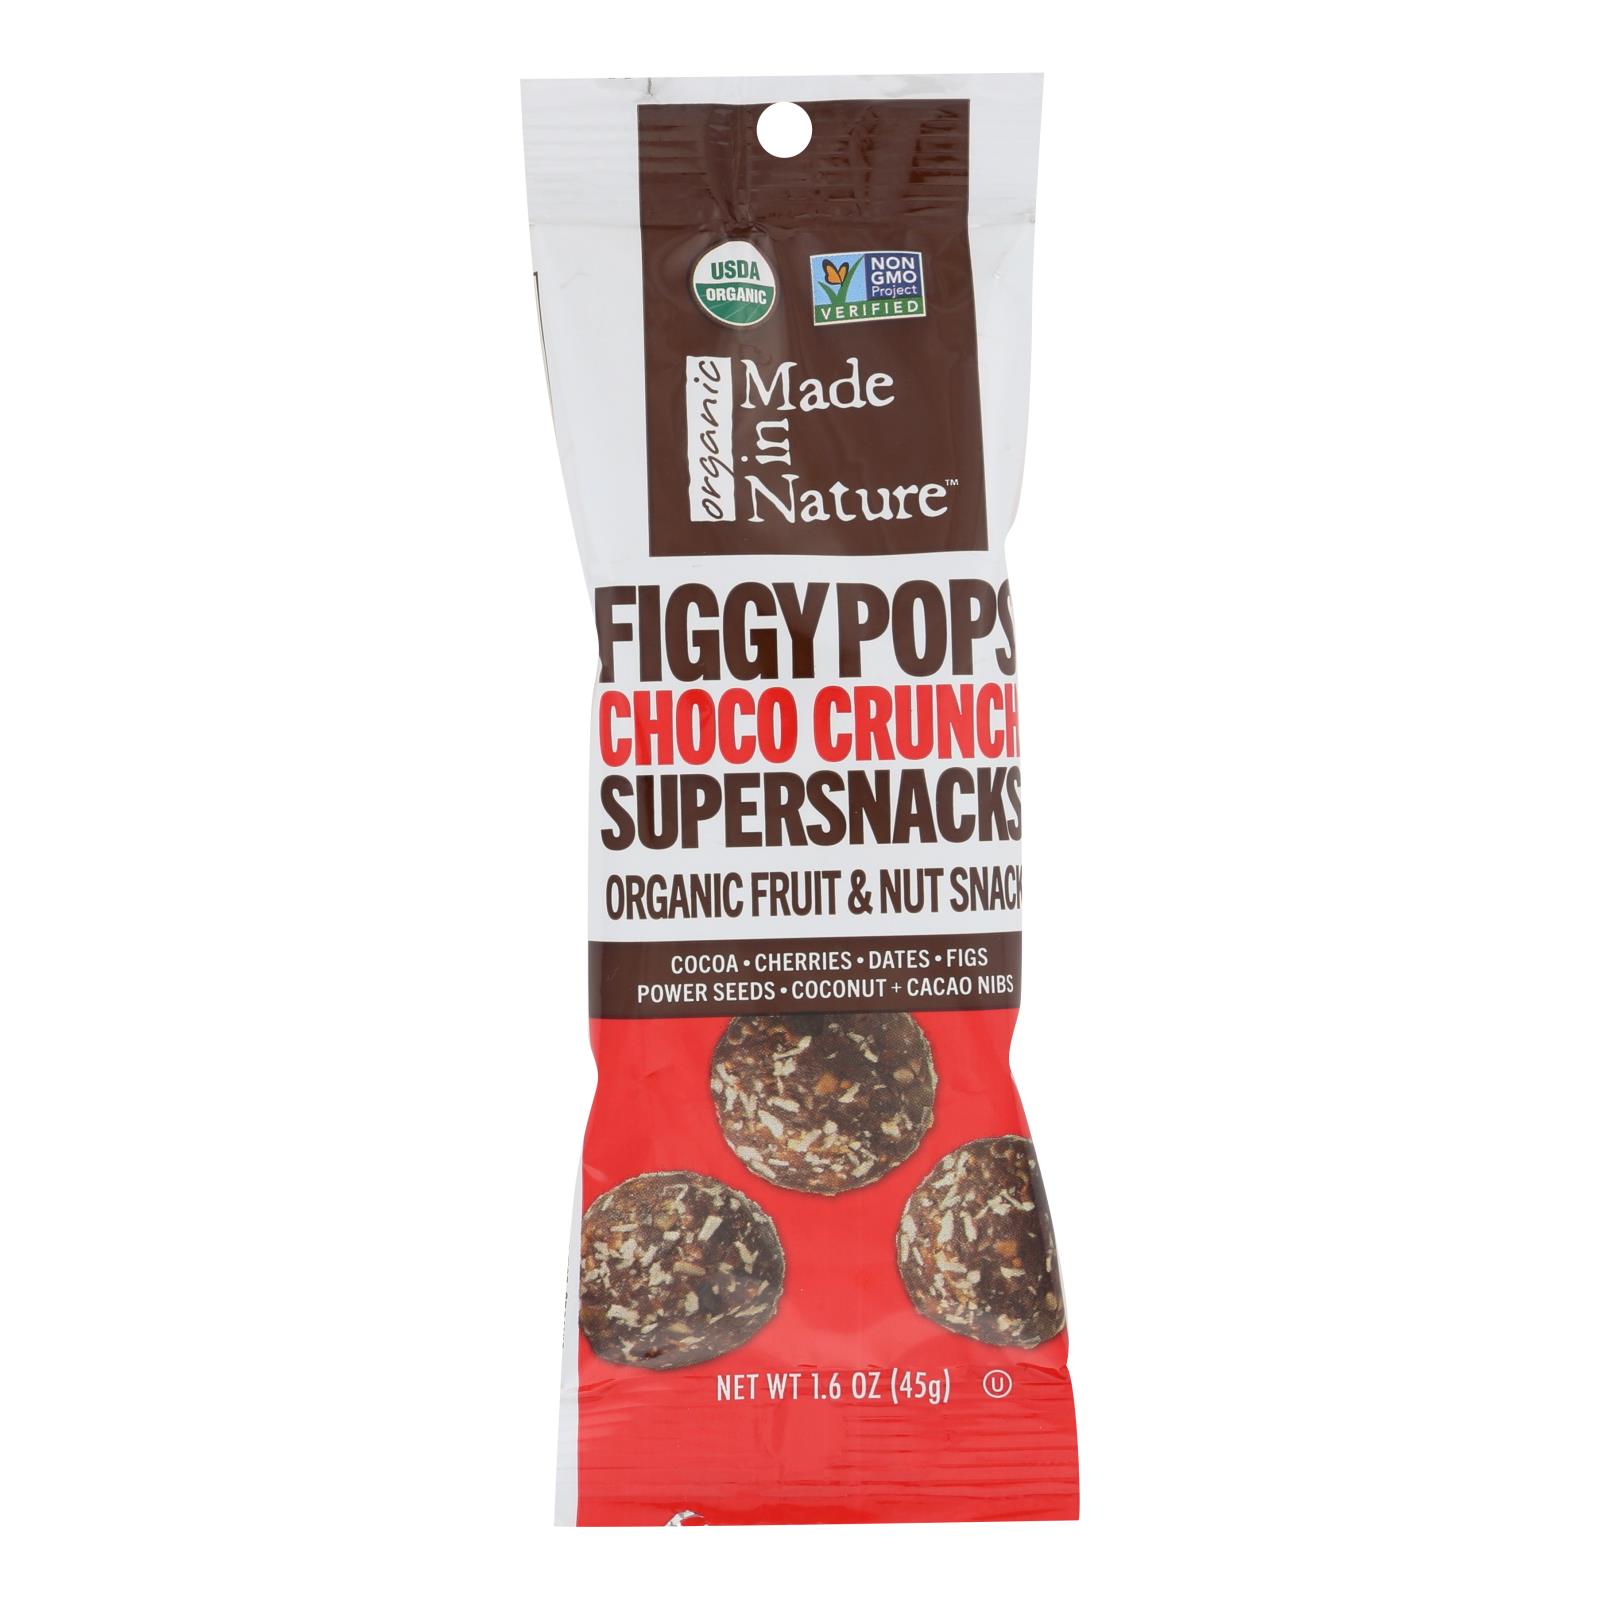 Made In Nature Figgypops Choco Crunch Supersnacks Organic Fruit & Nut Snacks - 10개 묶음상품 - 1.6 OZ